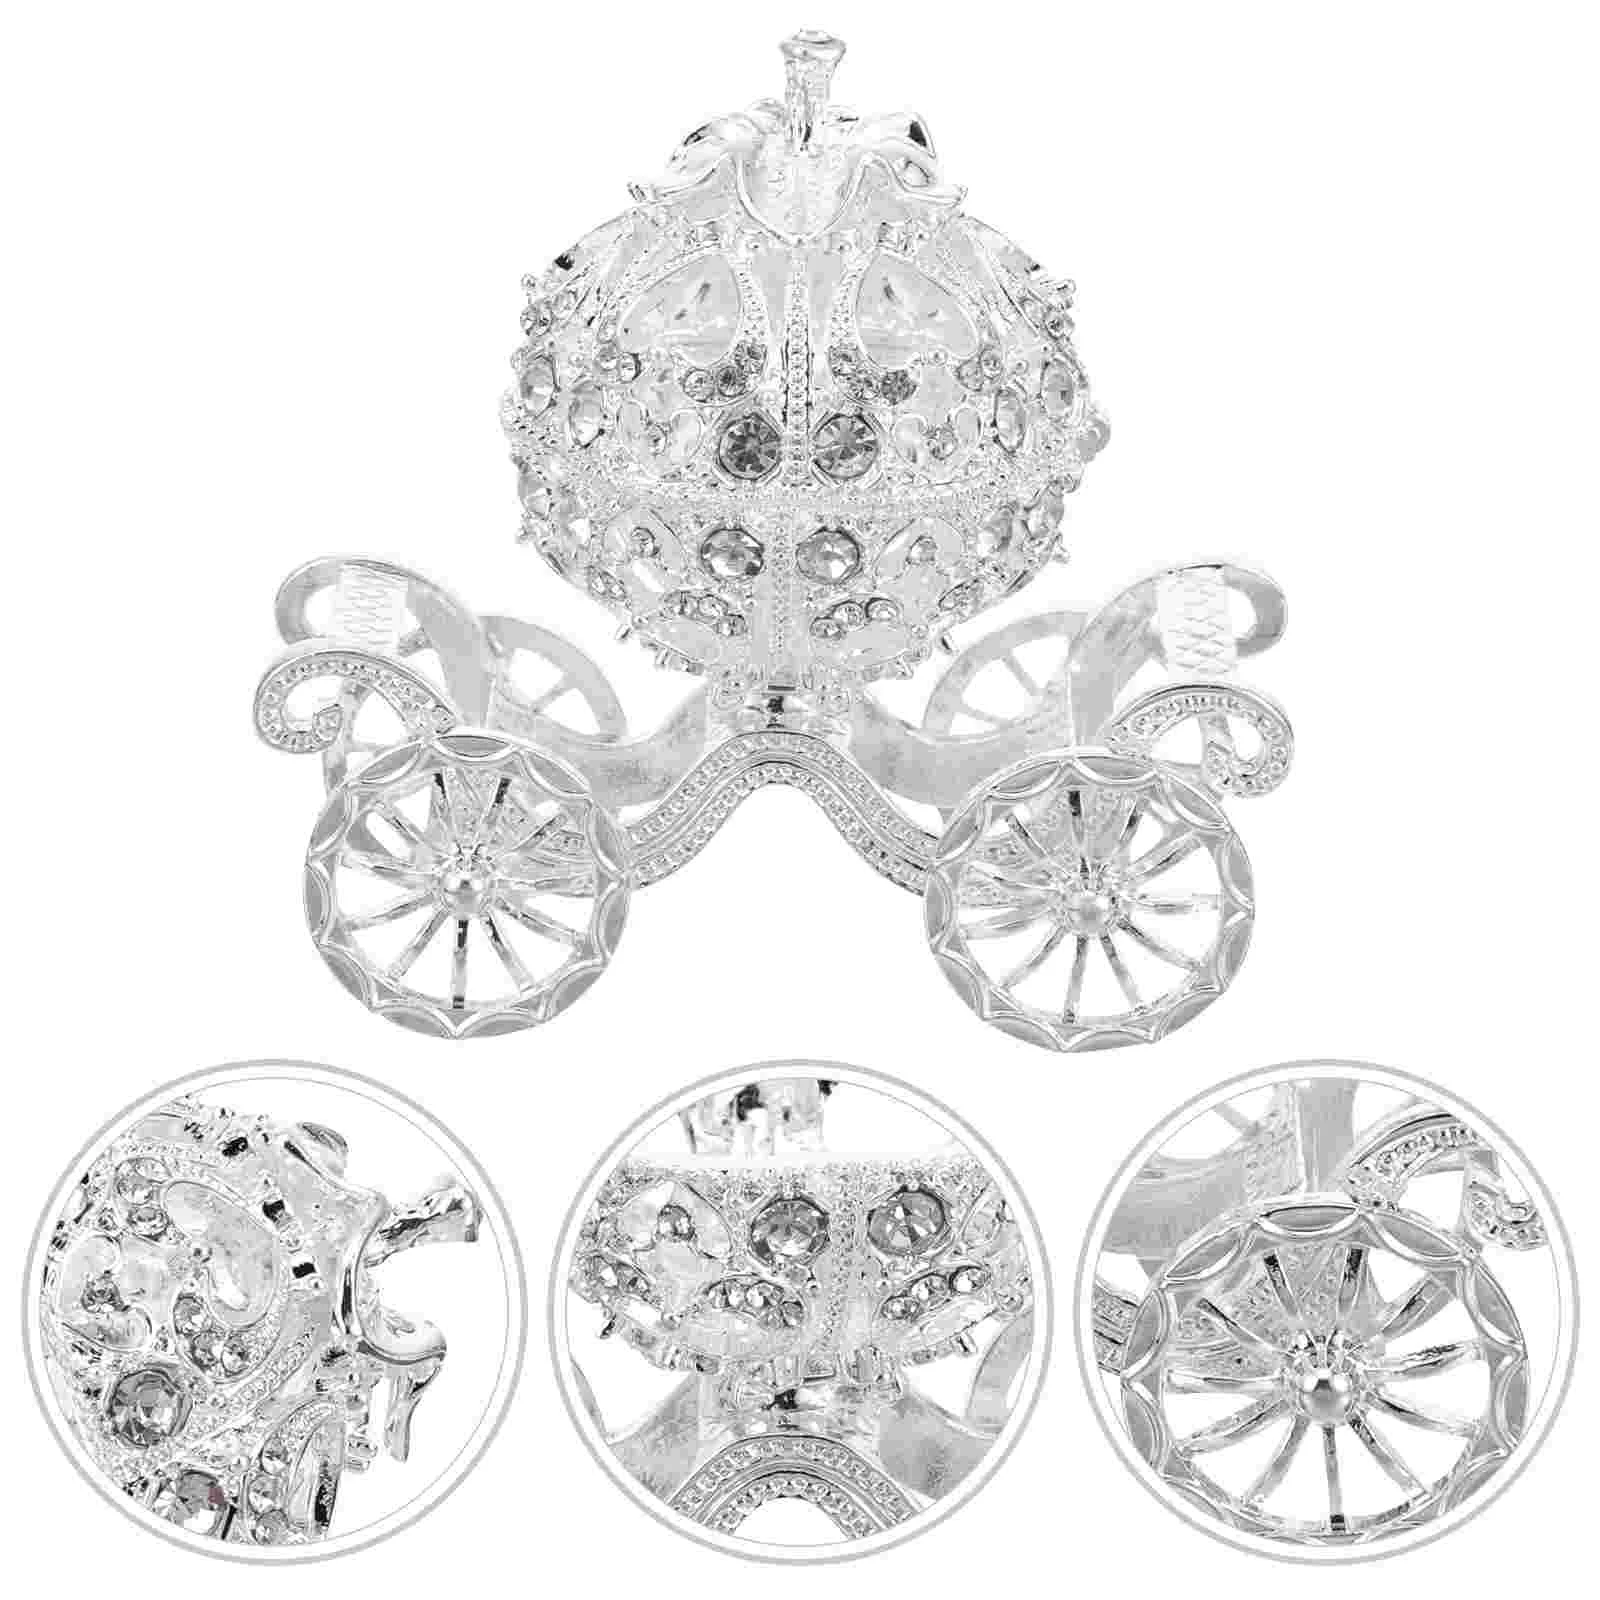 Trinket Box Carriage Jewelry Chests Creative Gift Ornament Rhinestone Crystal Pumpkin Carriage bags accessories gift v2 aluminum plate y carriage accessories scs8uu linear bearing alloy belt holder clip screw for cnc prusa i3 heatbad parts